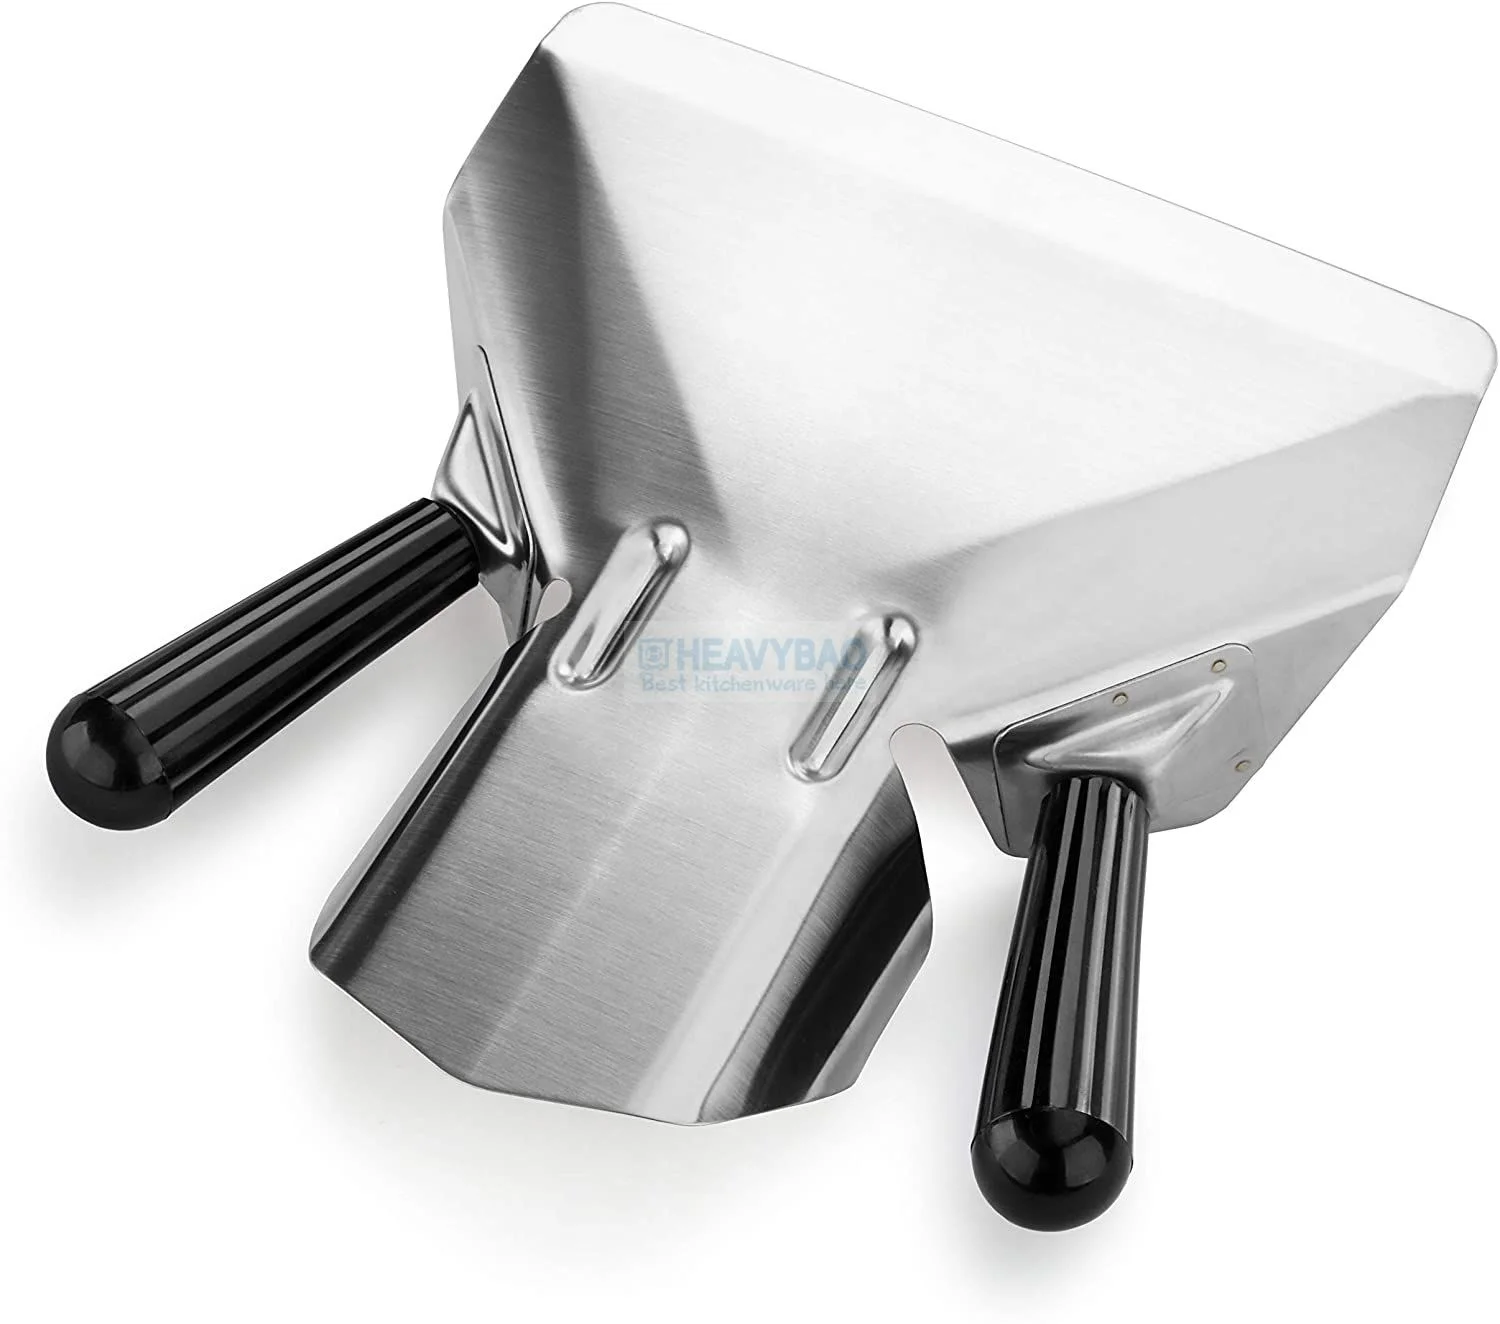 3 x Stainless Steel Chip Shop Serving Scoops Shovels Baggers Fast Food Take Away 